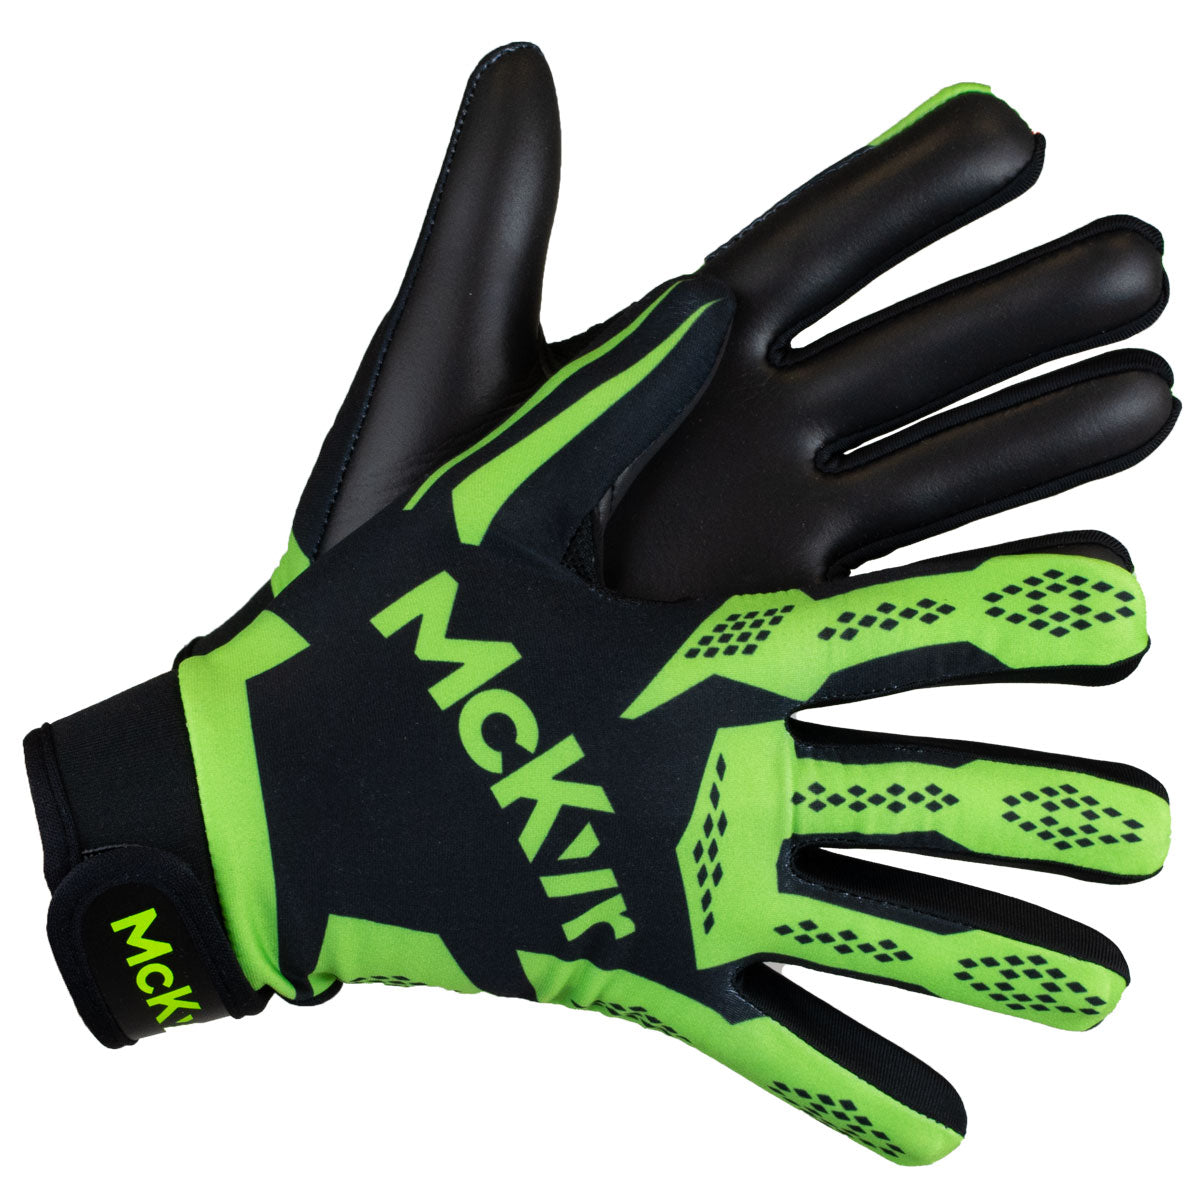 Mc Keever 2.0 Gaelic Gloves - Adult - Black/Lime Green